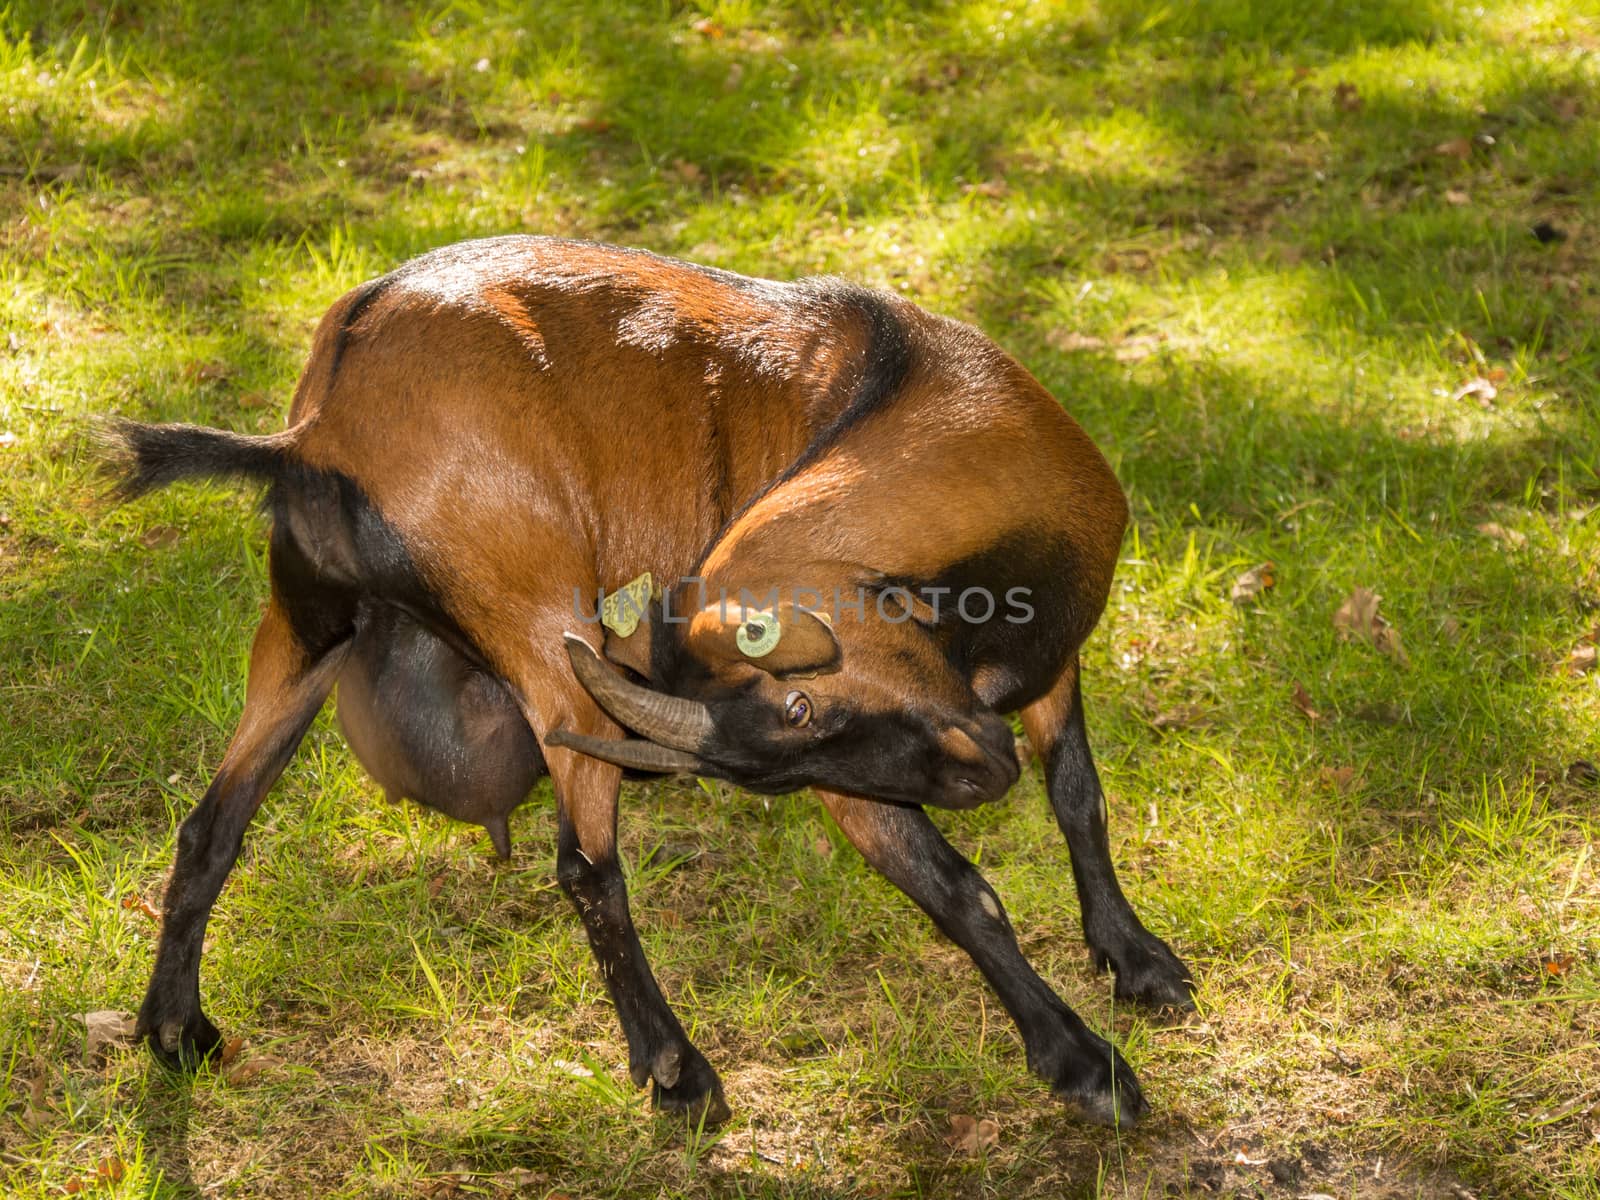 Brown goat at a farm, with itch, scratches himself with his horns